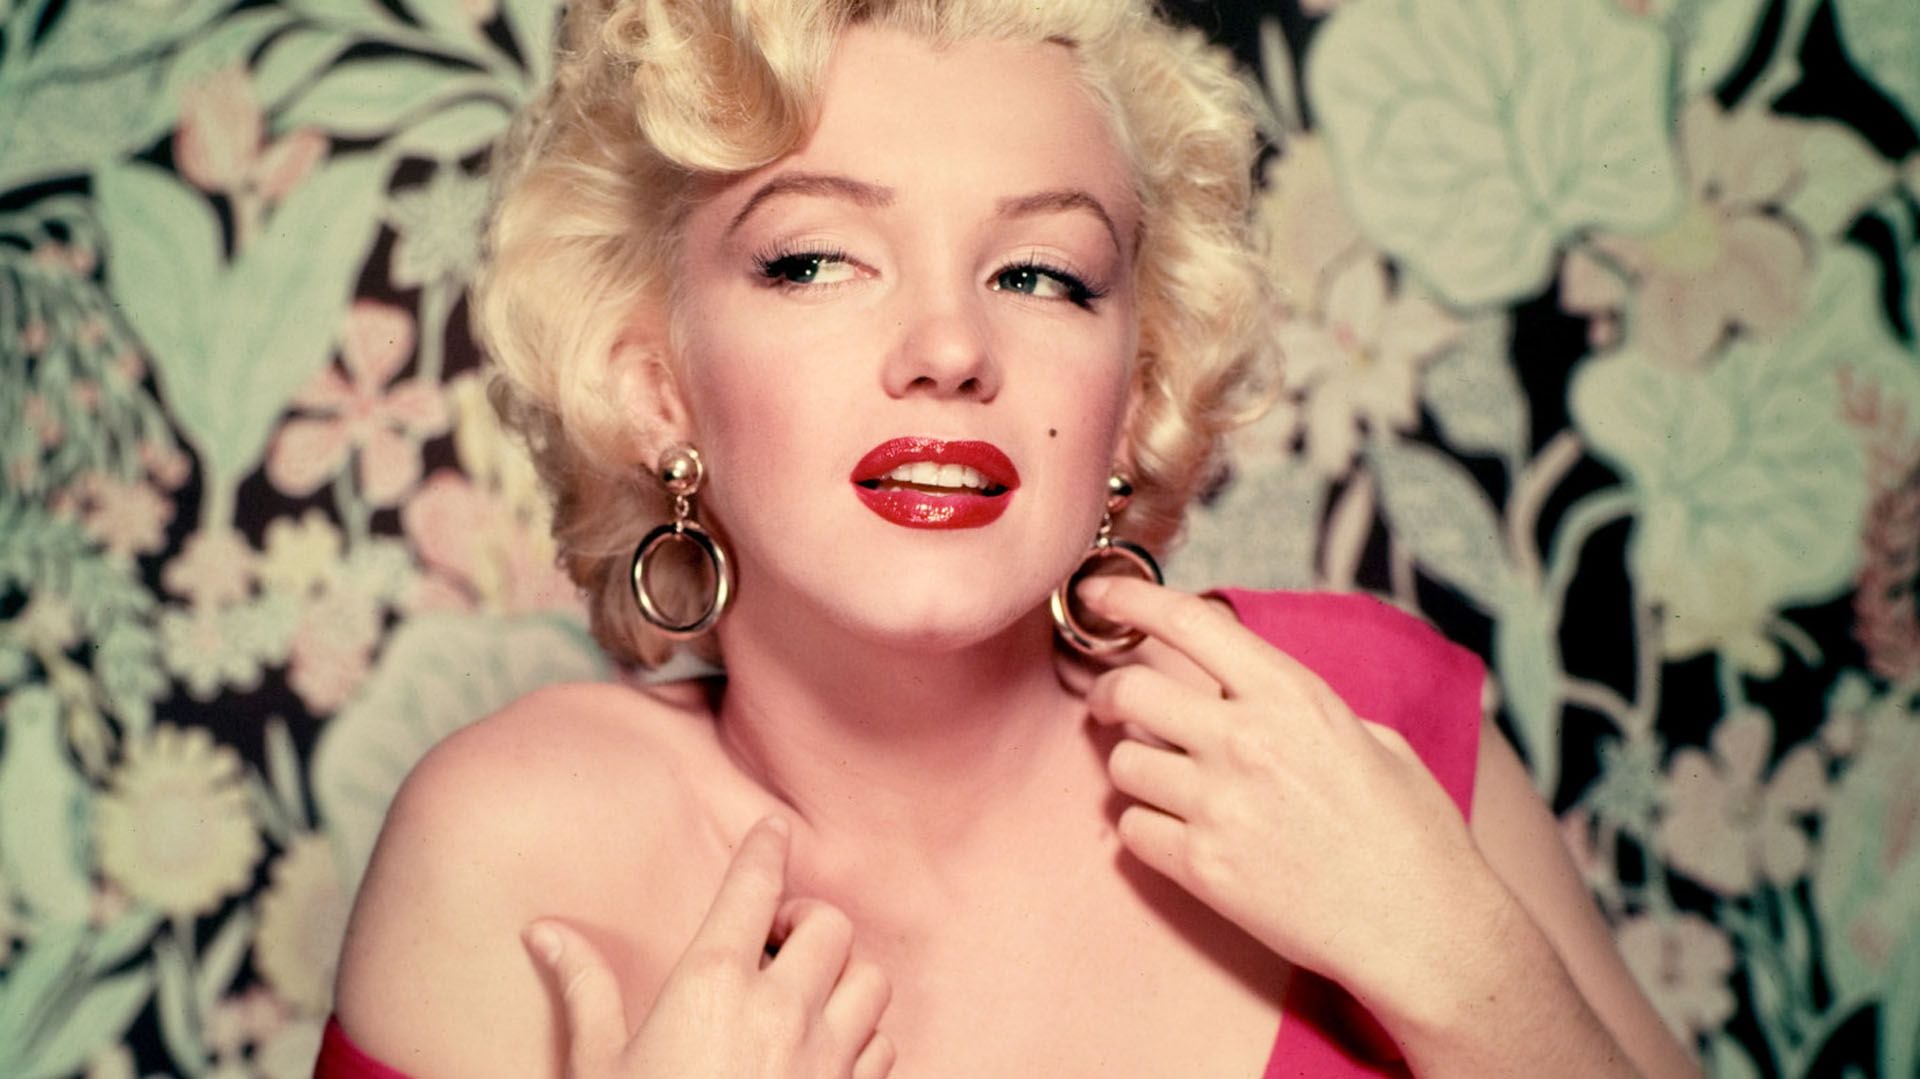 Life of Marilyn Monroe not so realistically portrayed in 'Blonde